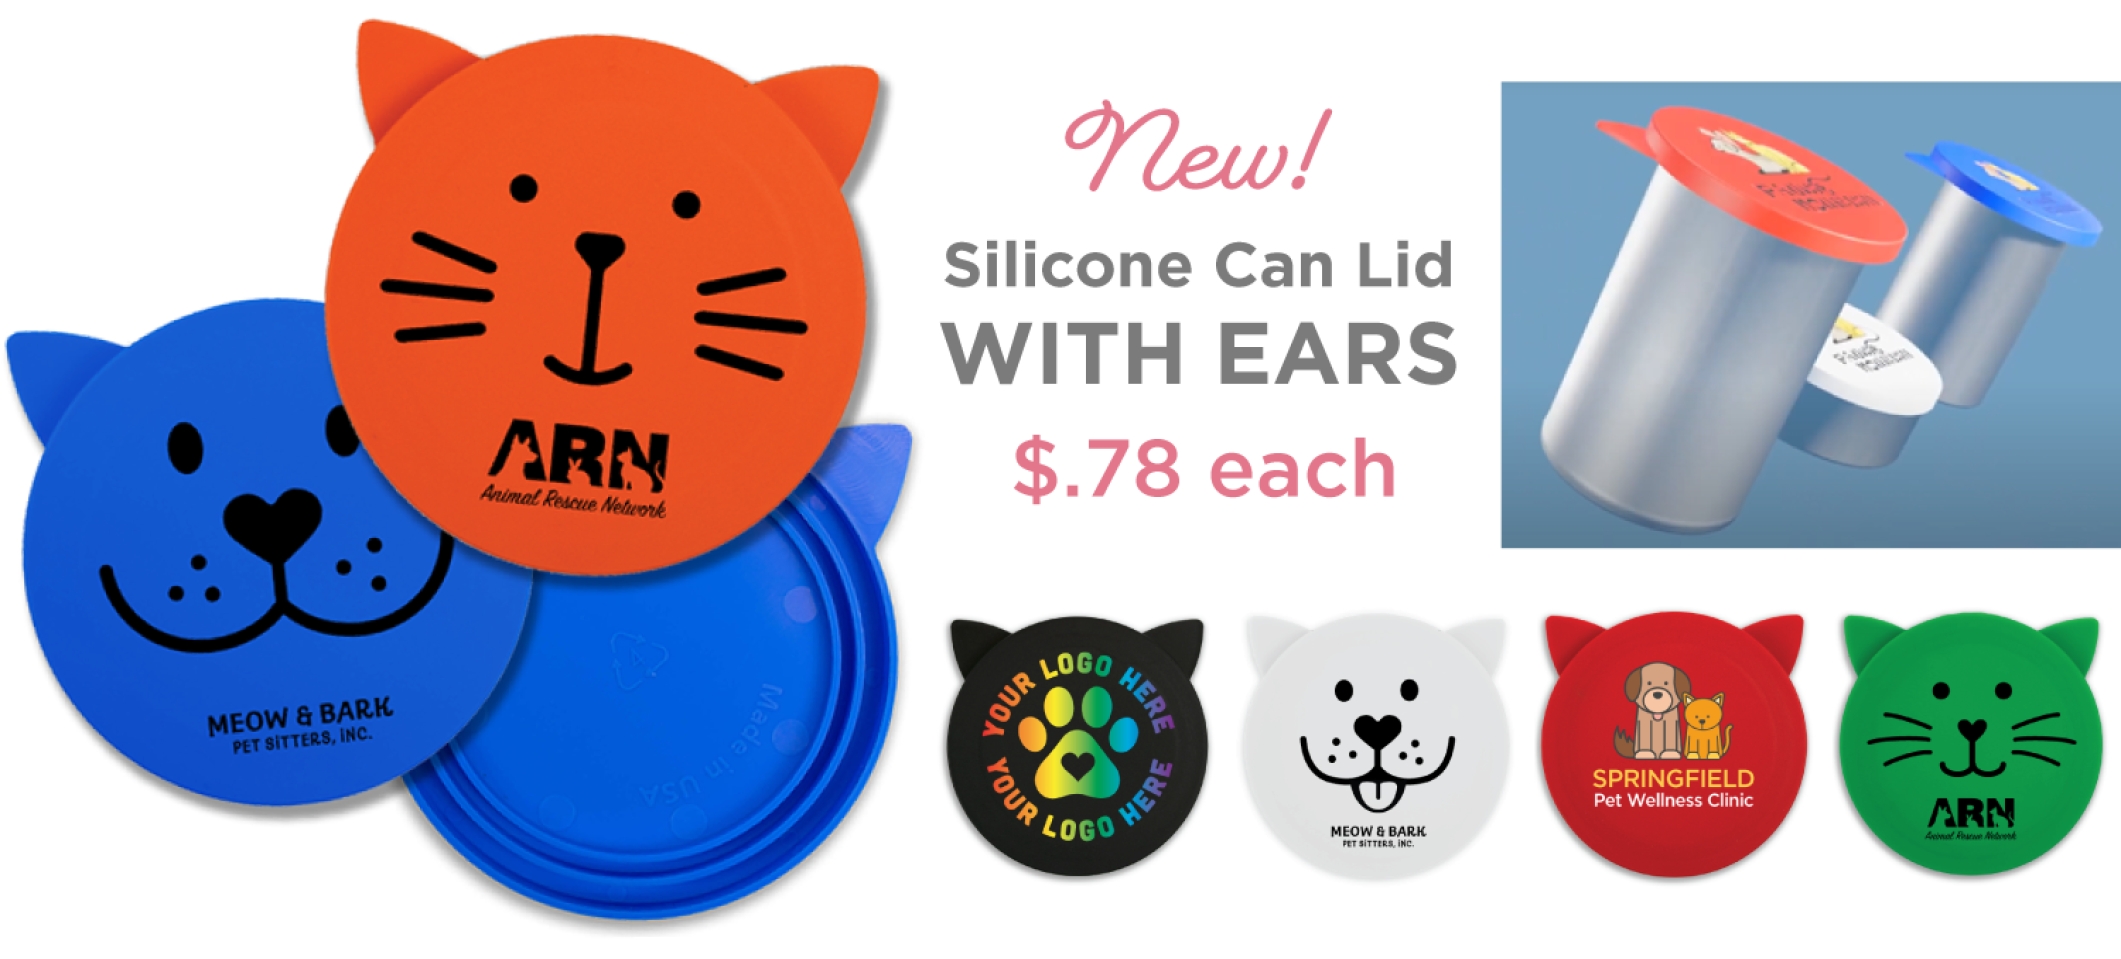 Silicone Can Lid with Ears